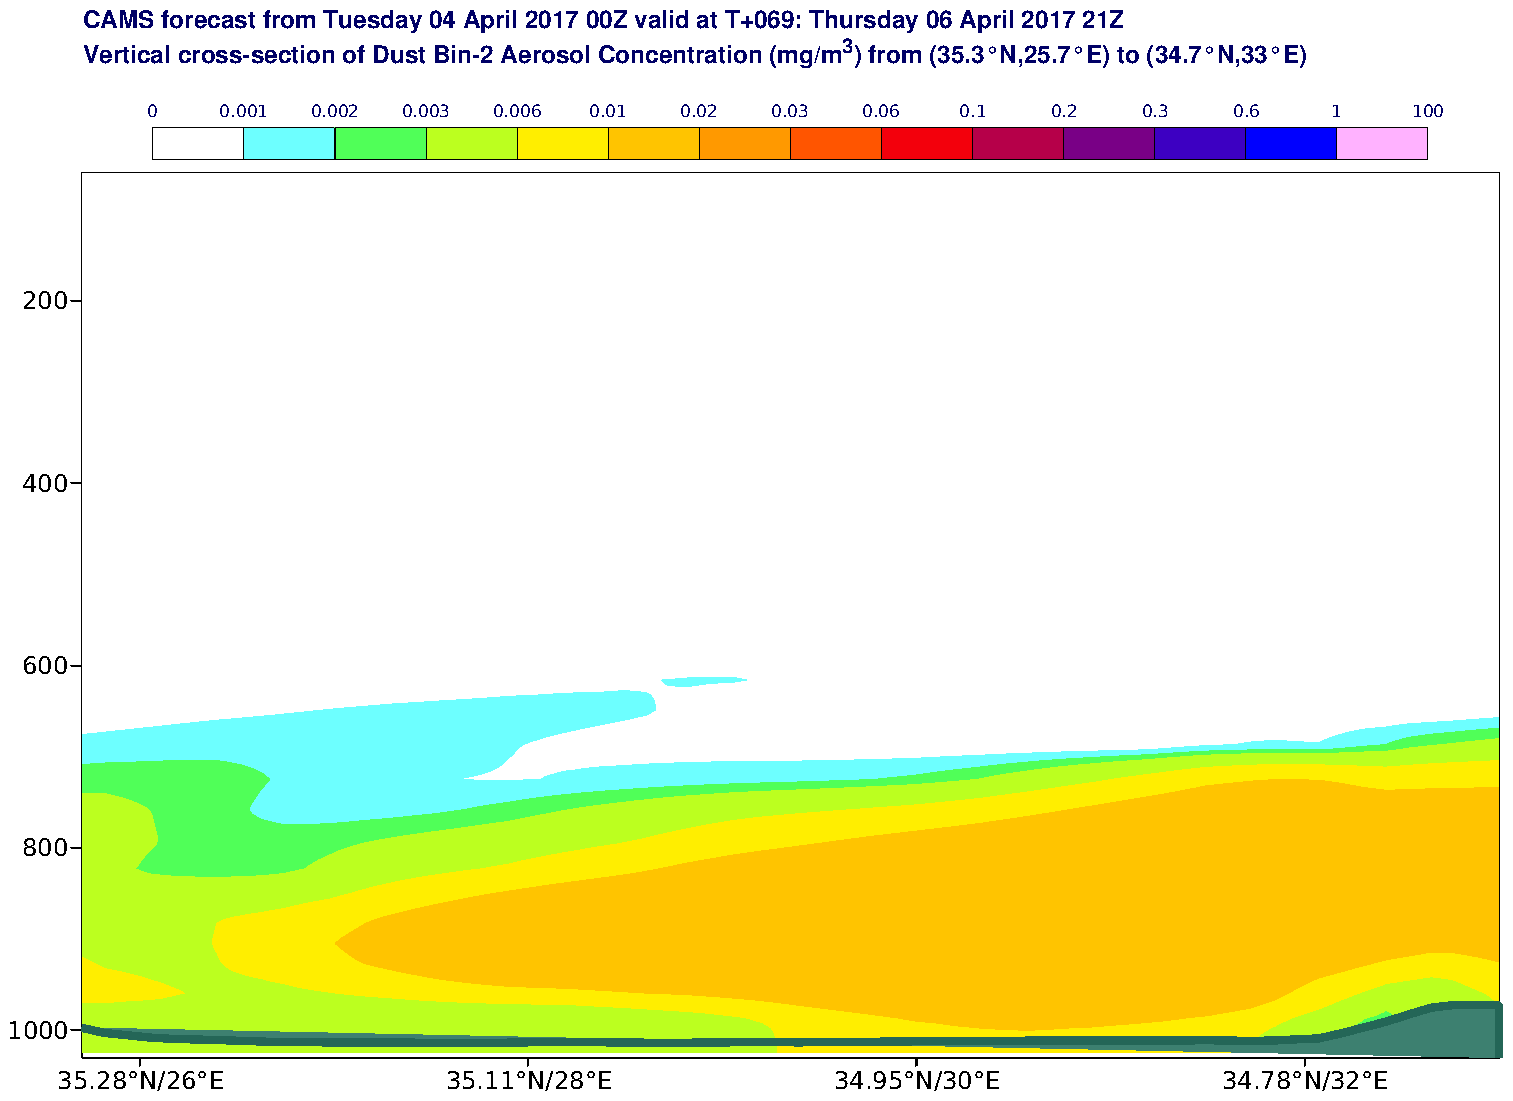 Vertical cross-section of Dust Bin-2 Aerosol Concentration (mg/m3) valid at T69 - 2017-04-06 21:00